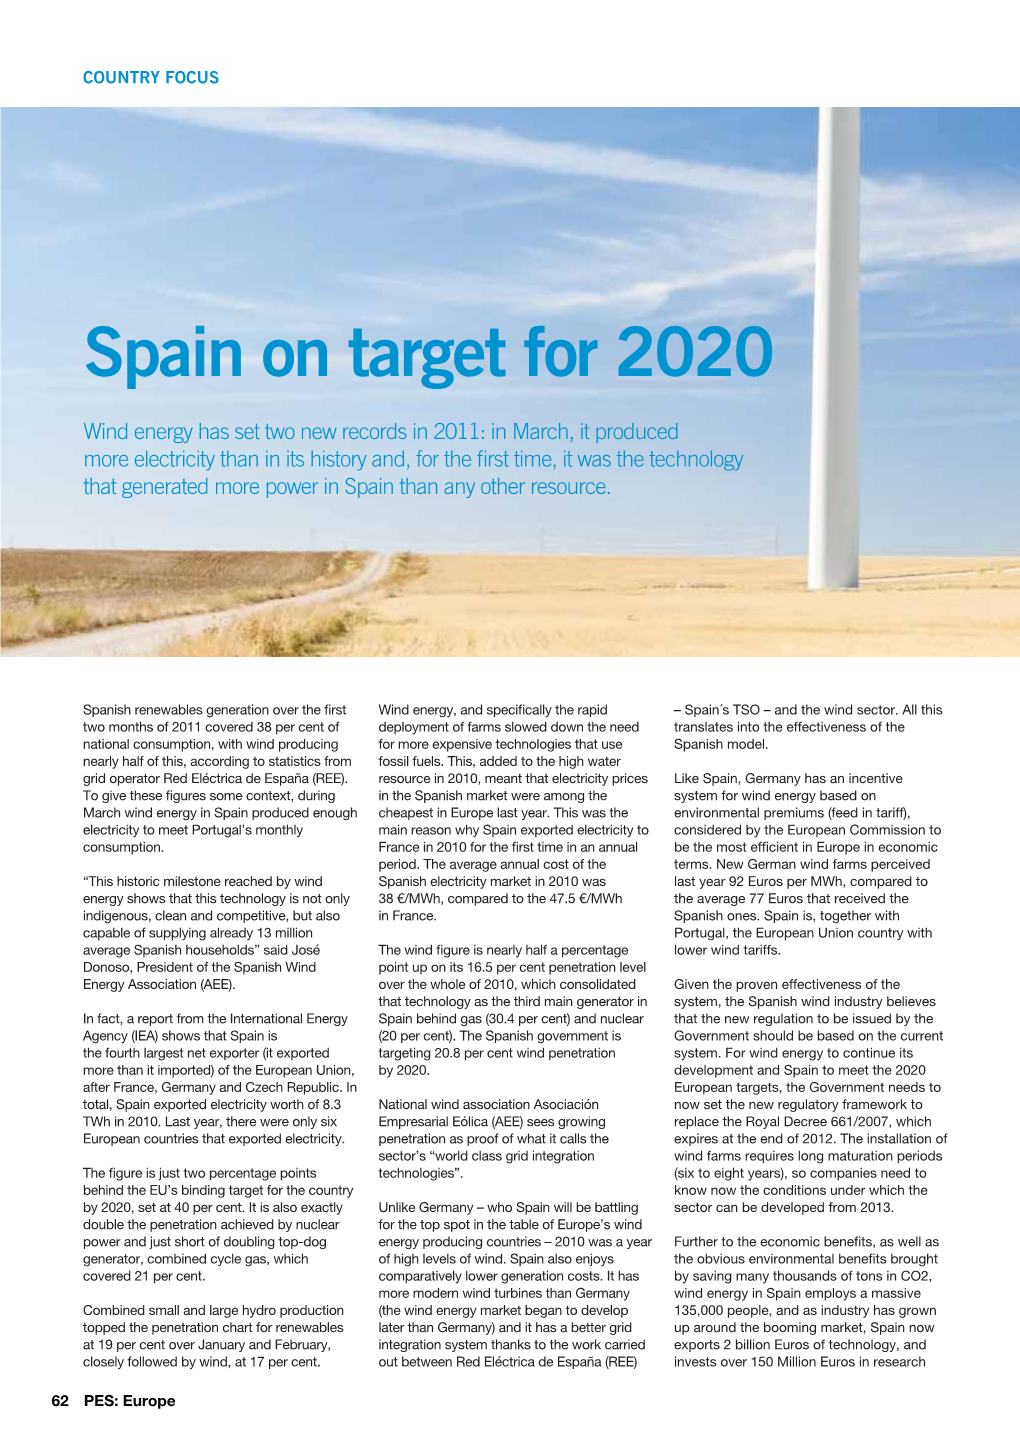 Spain on Target for 2020